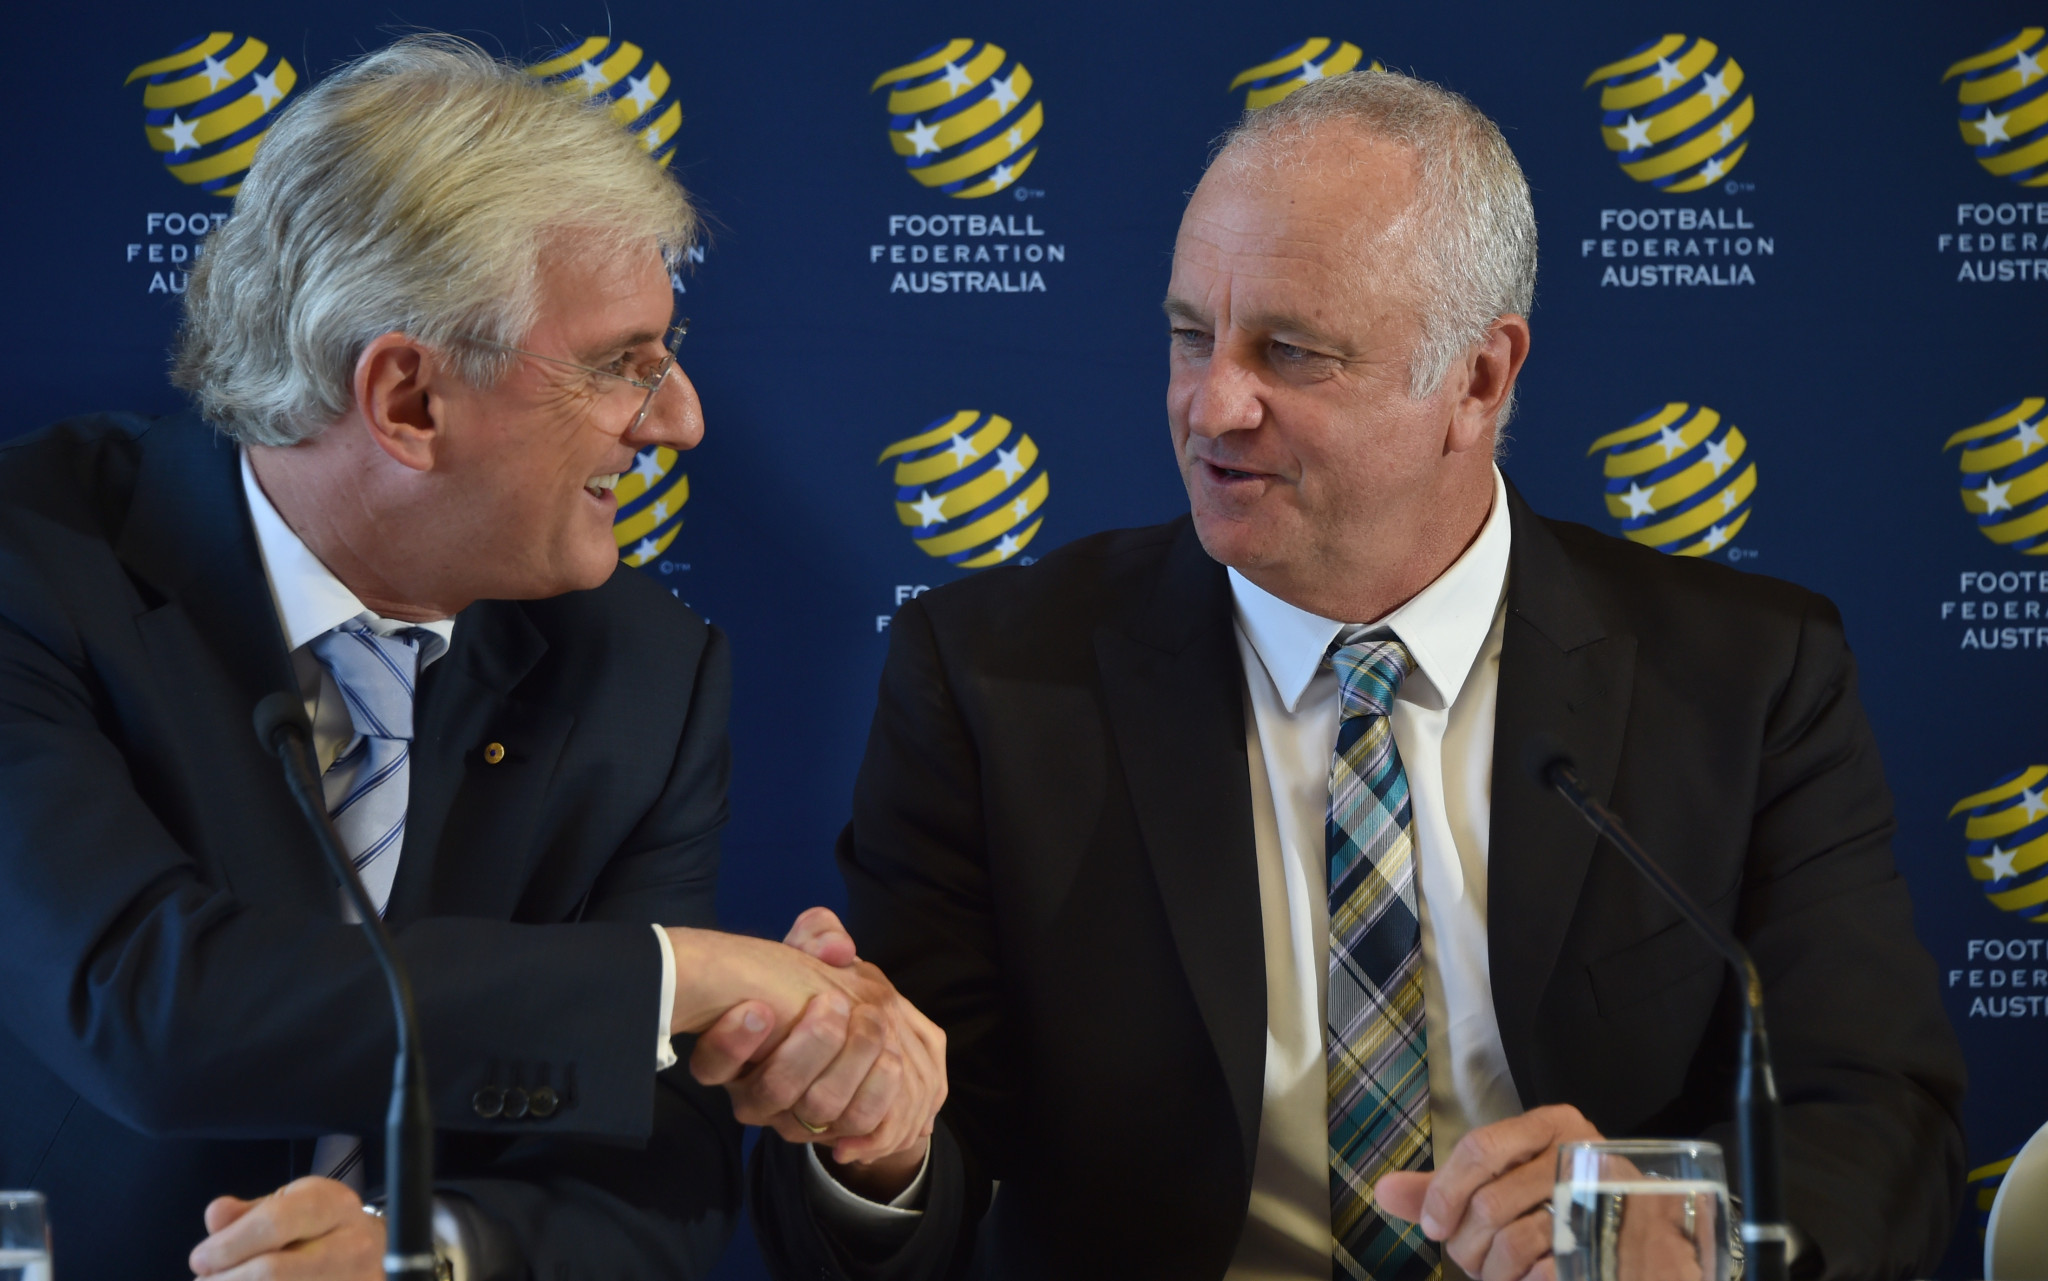 Congress expansion and separation of A-League among proposals rejected by FFA